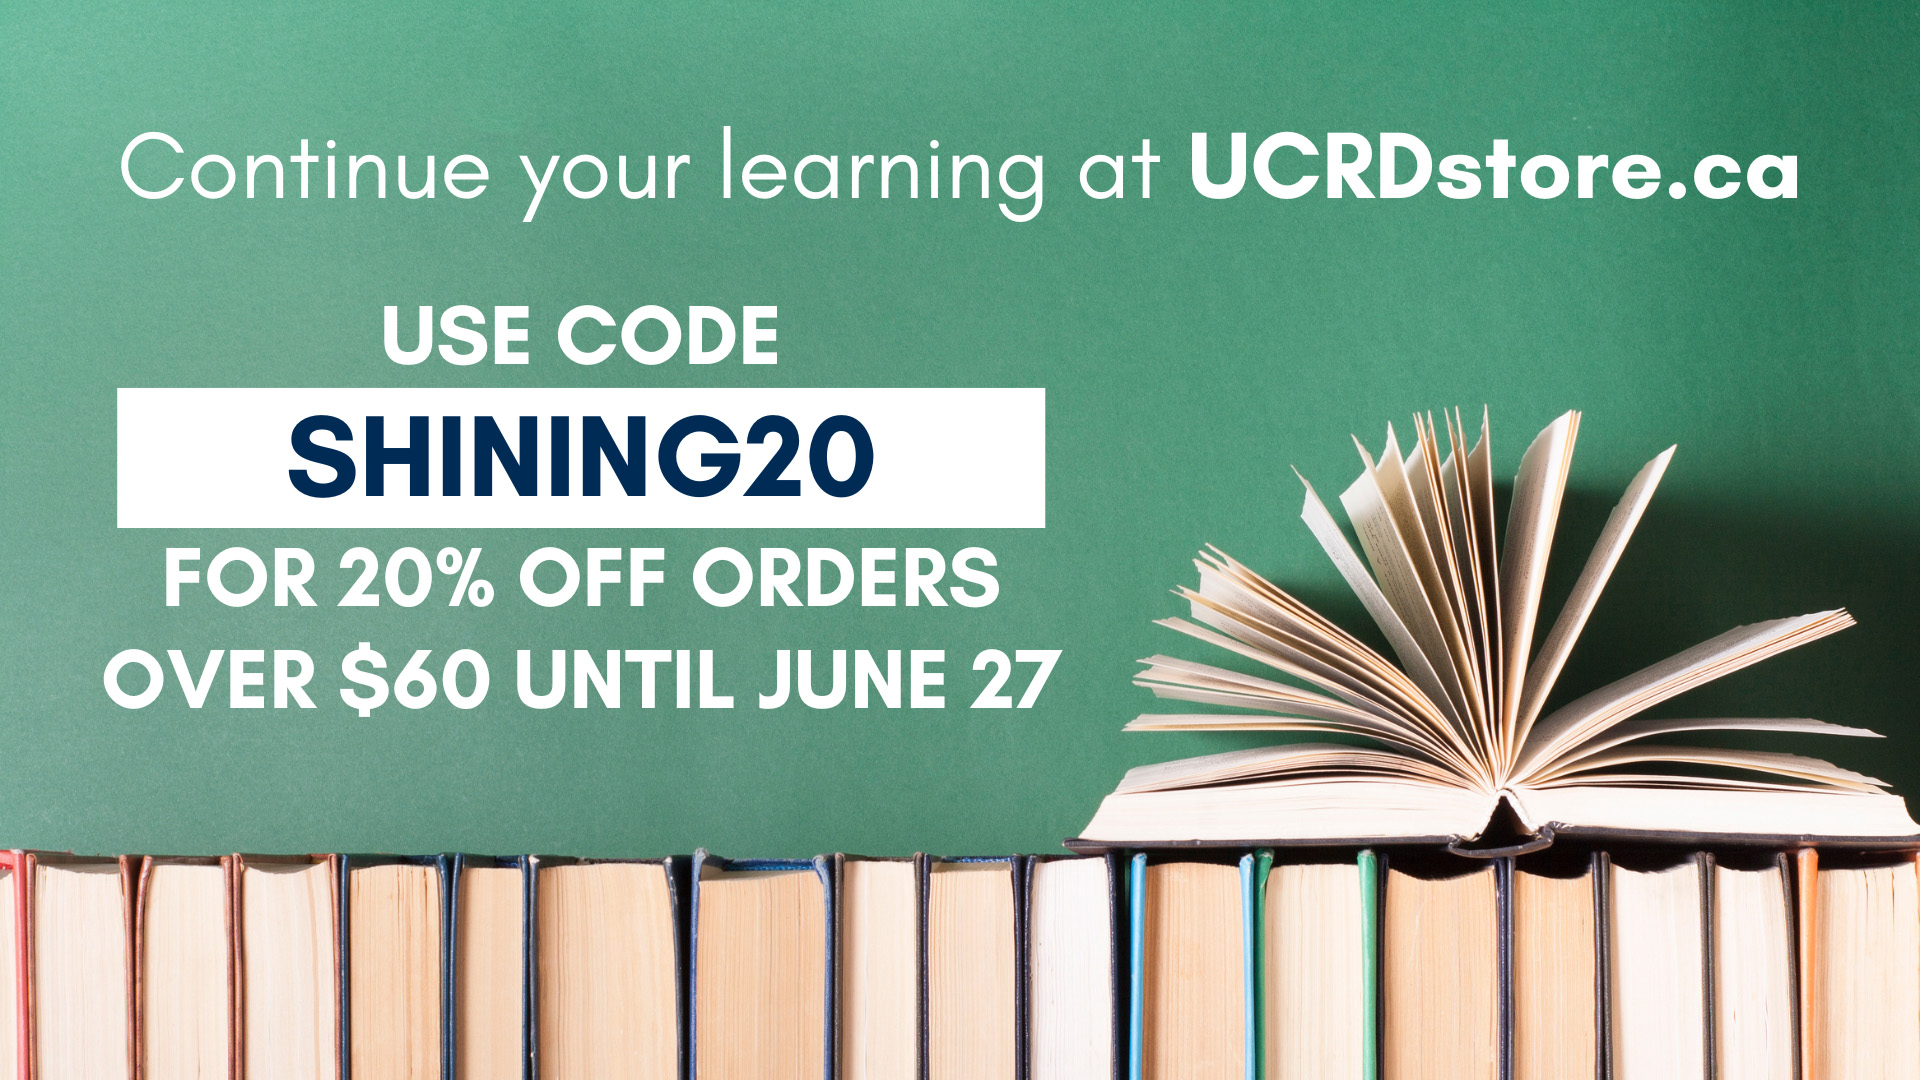 ucrd discount code - use shining20 for 20 percent off